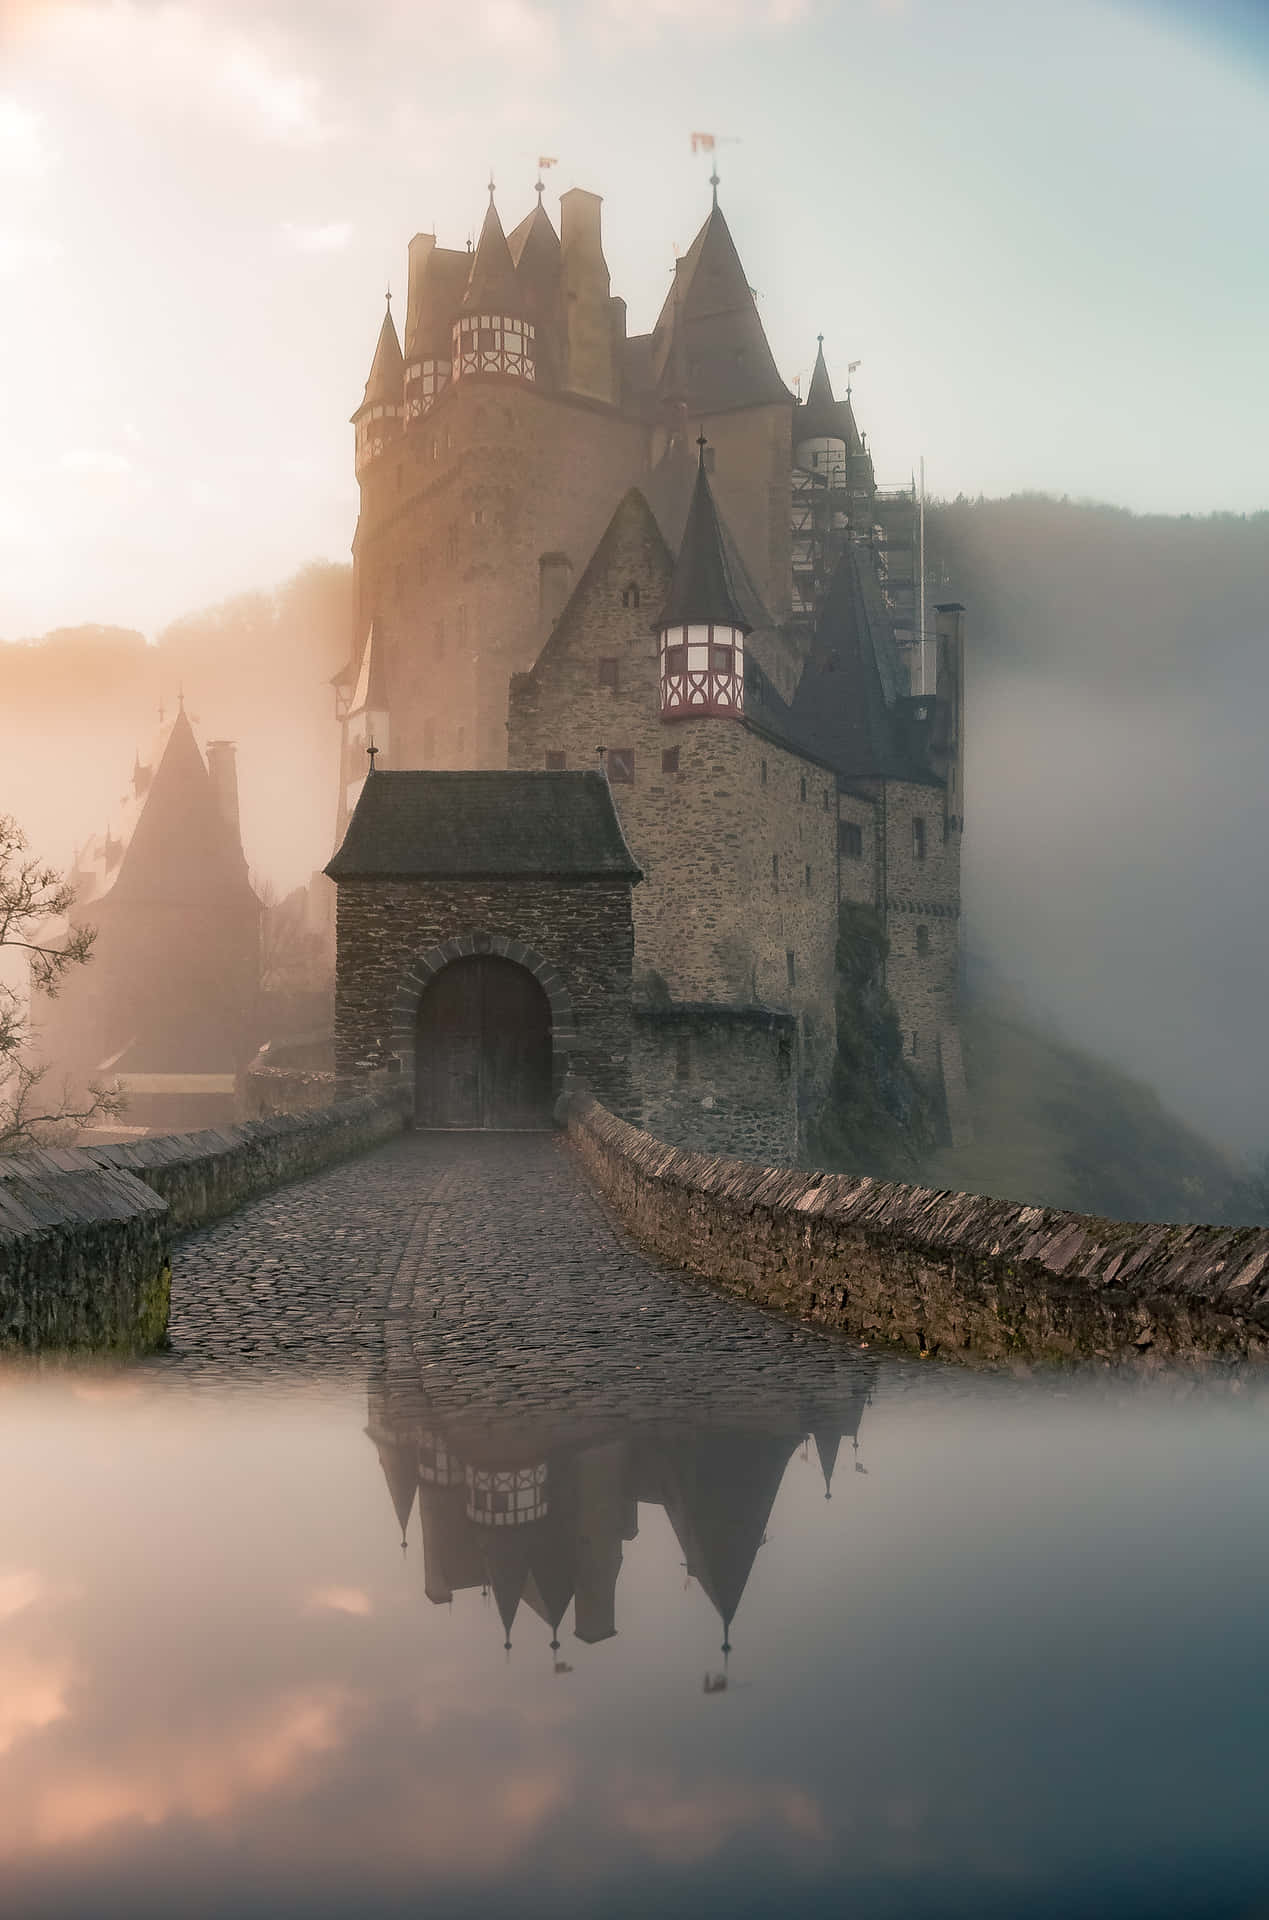 A scenic view of a medieval castle